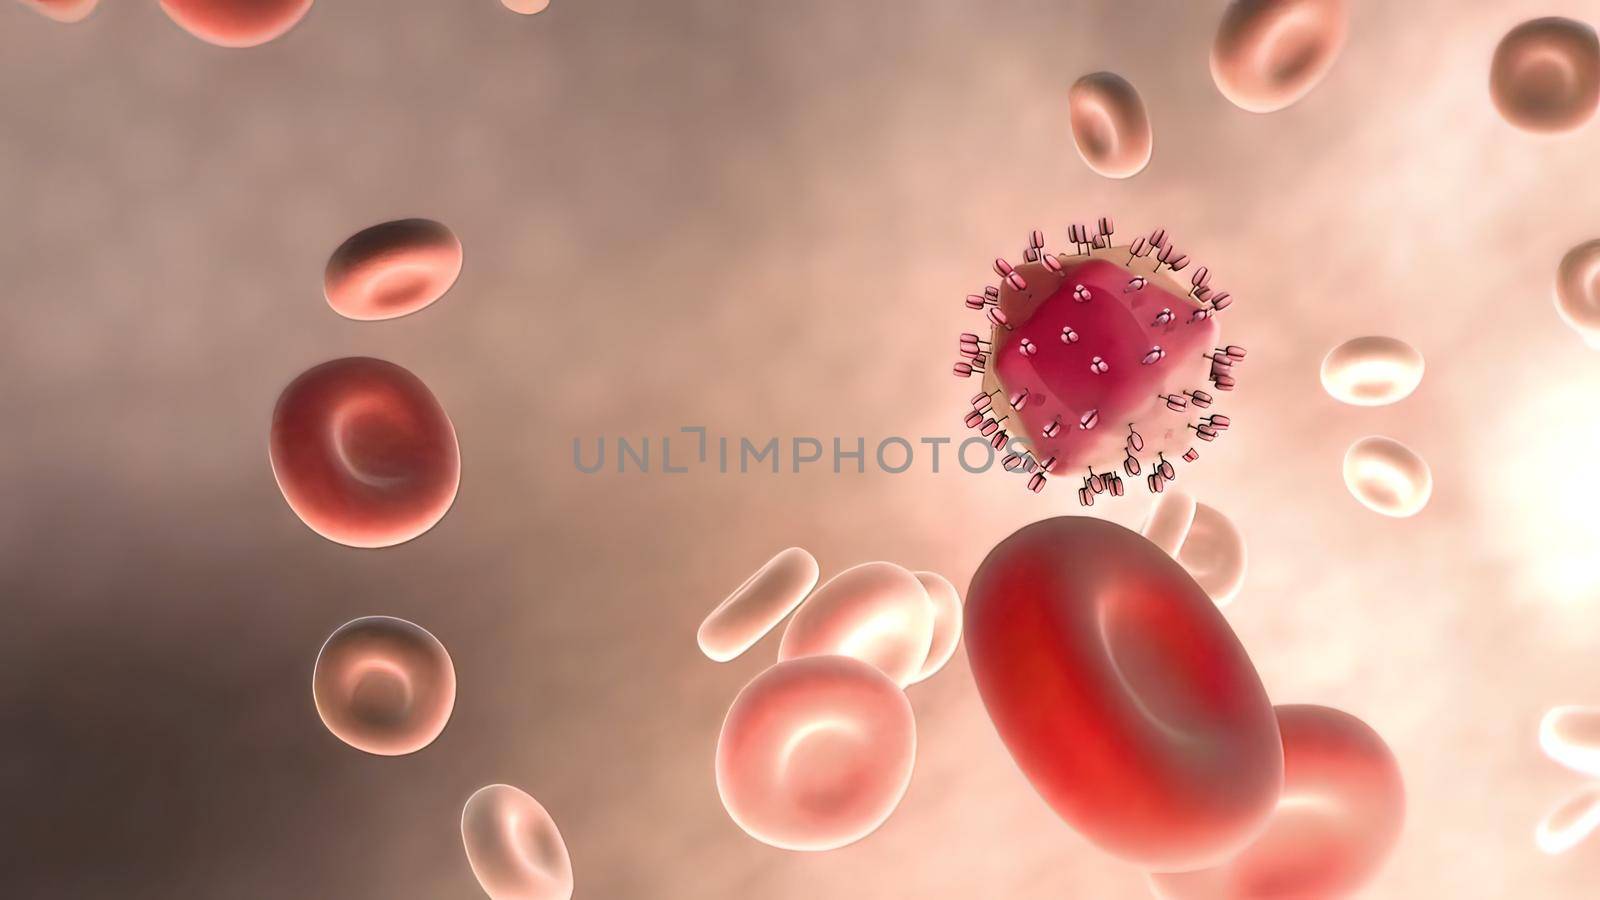 Although Hepatitis A is typically transmitted through a fecal-oral route, infection from blood transfusion has been reported. 3D illustration